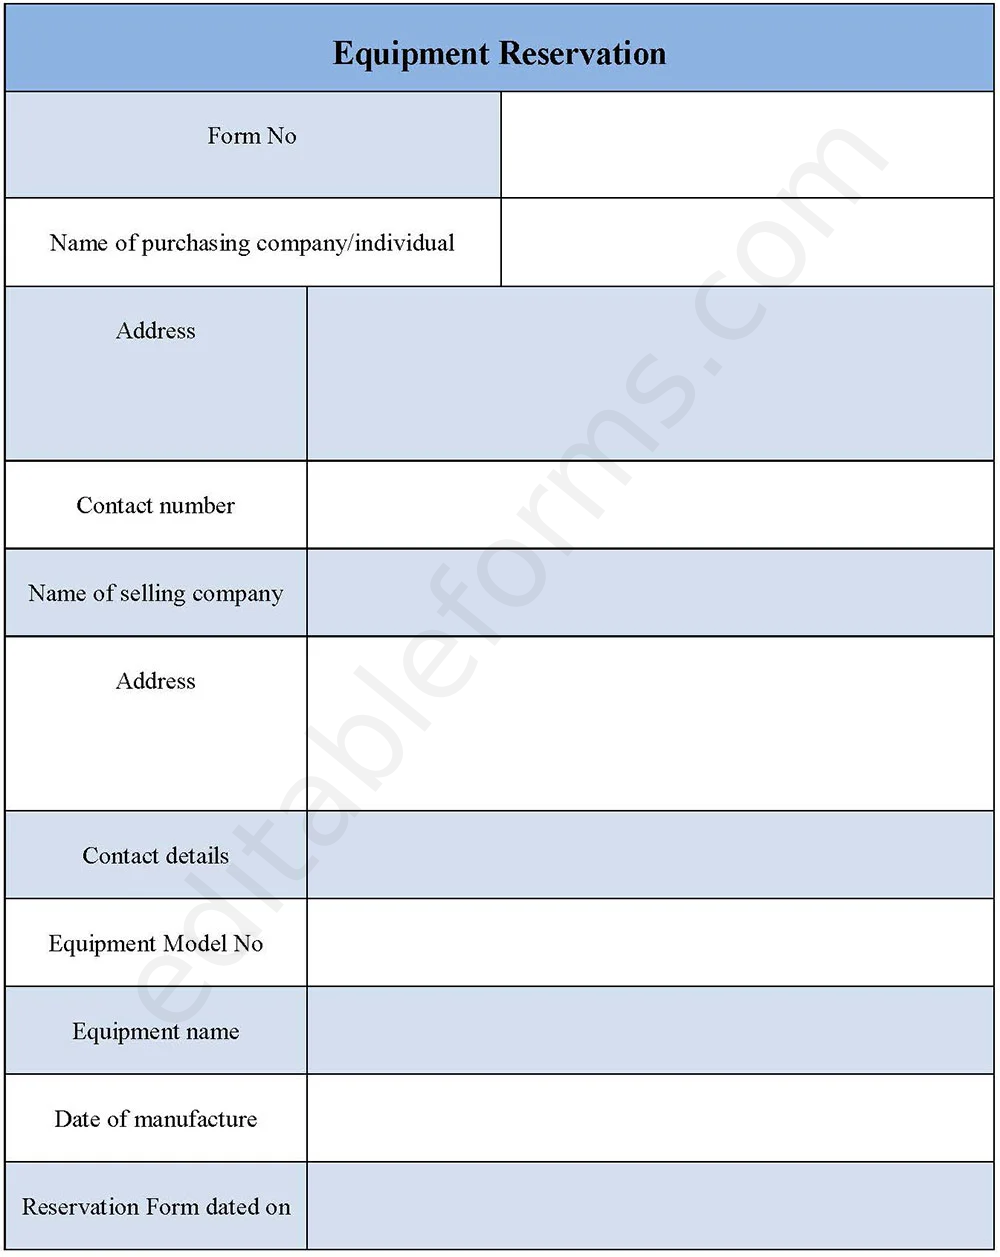 Equipment Reservation Fillable PDF Template